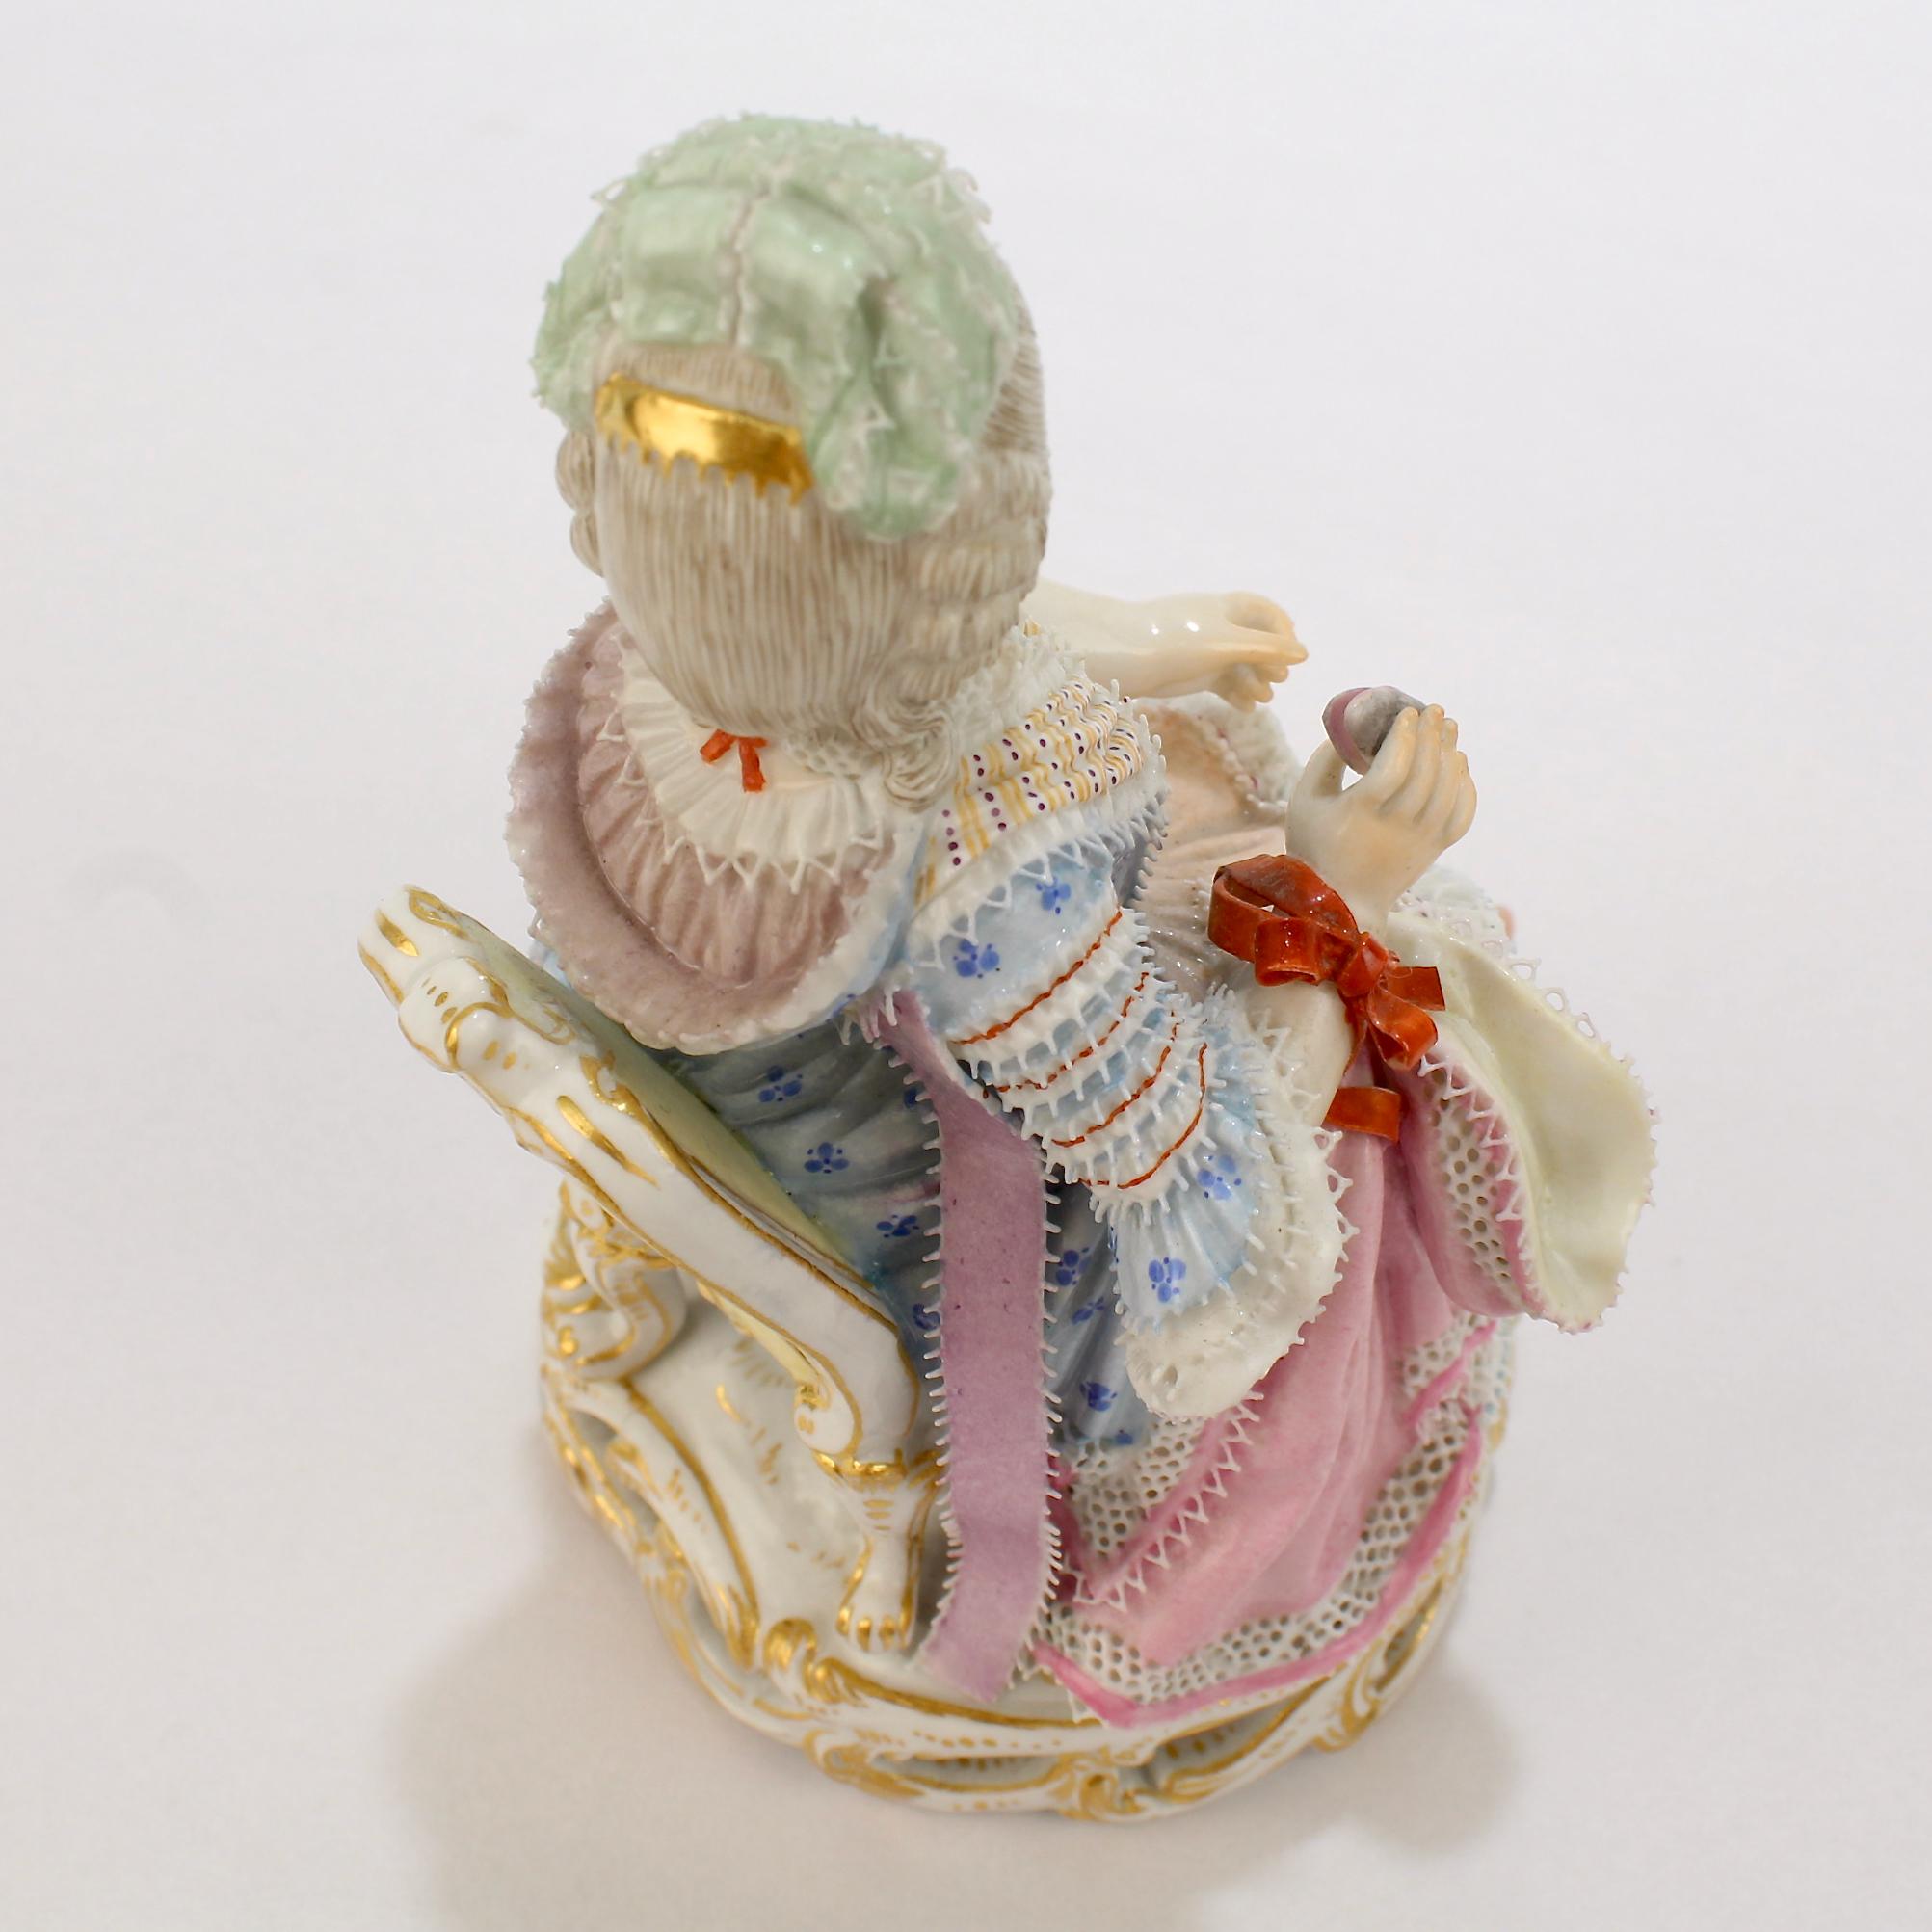 20th Century Antique Meissen Porcelain Figurine of a Girl with a Thread Winder Model No. C 28